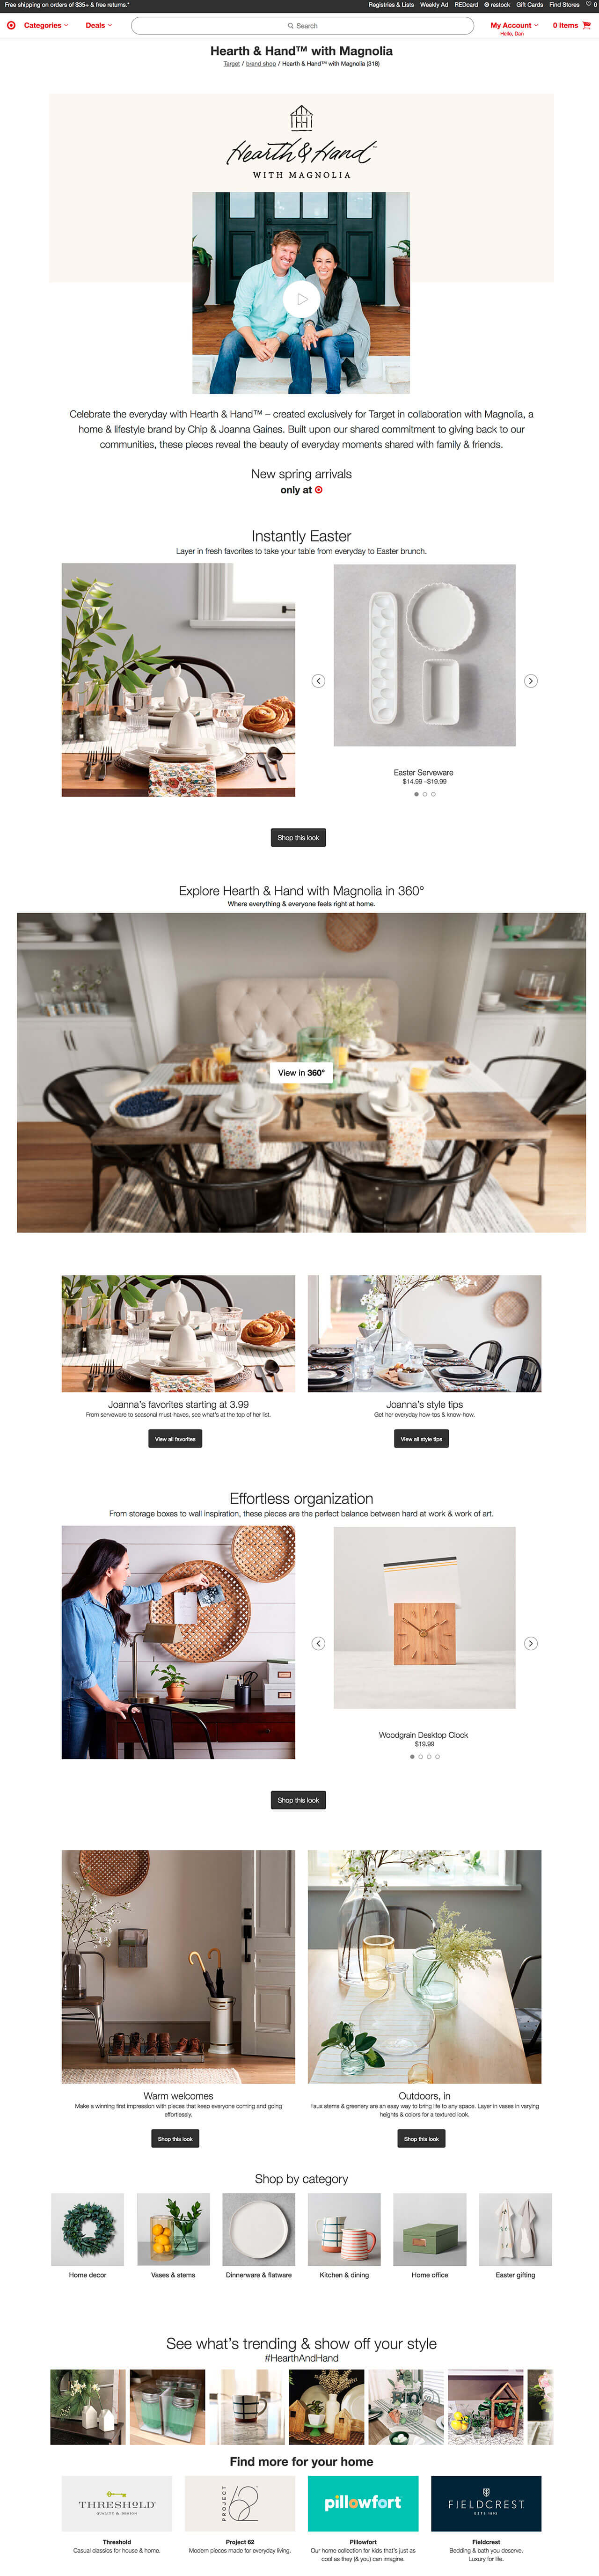 Hearth & Home products promotional page on Target's website